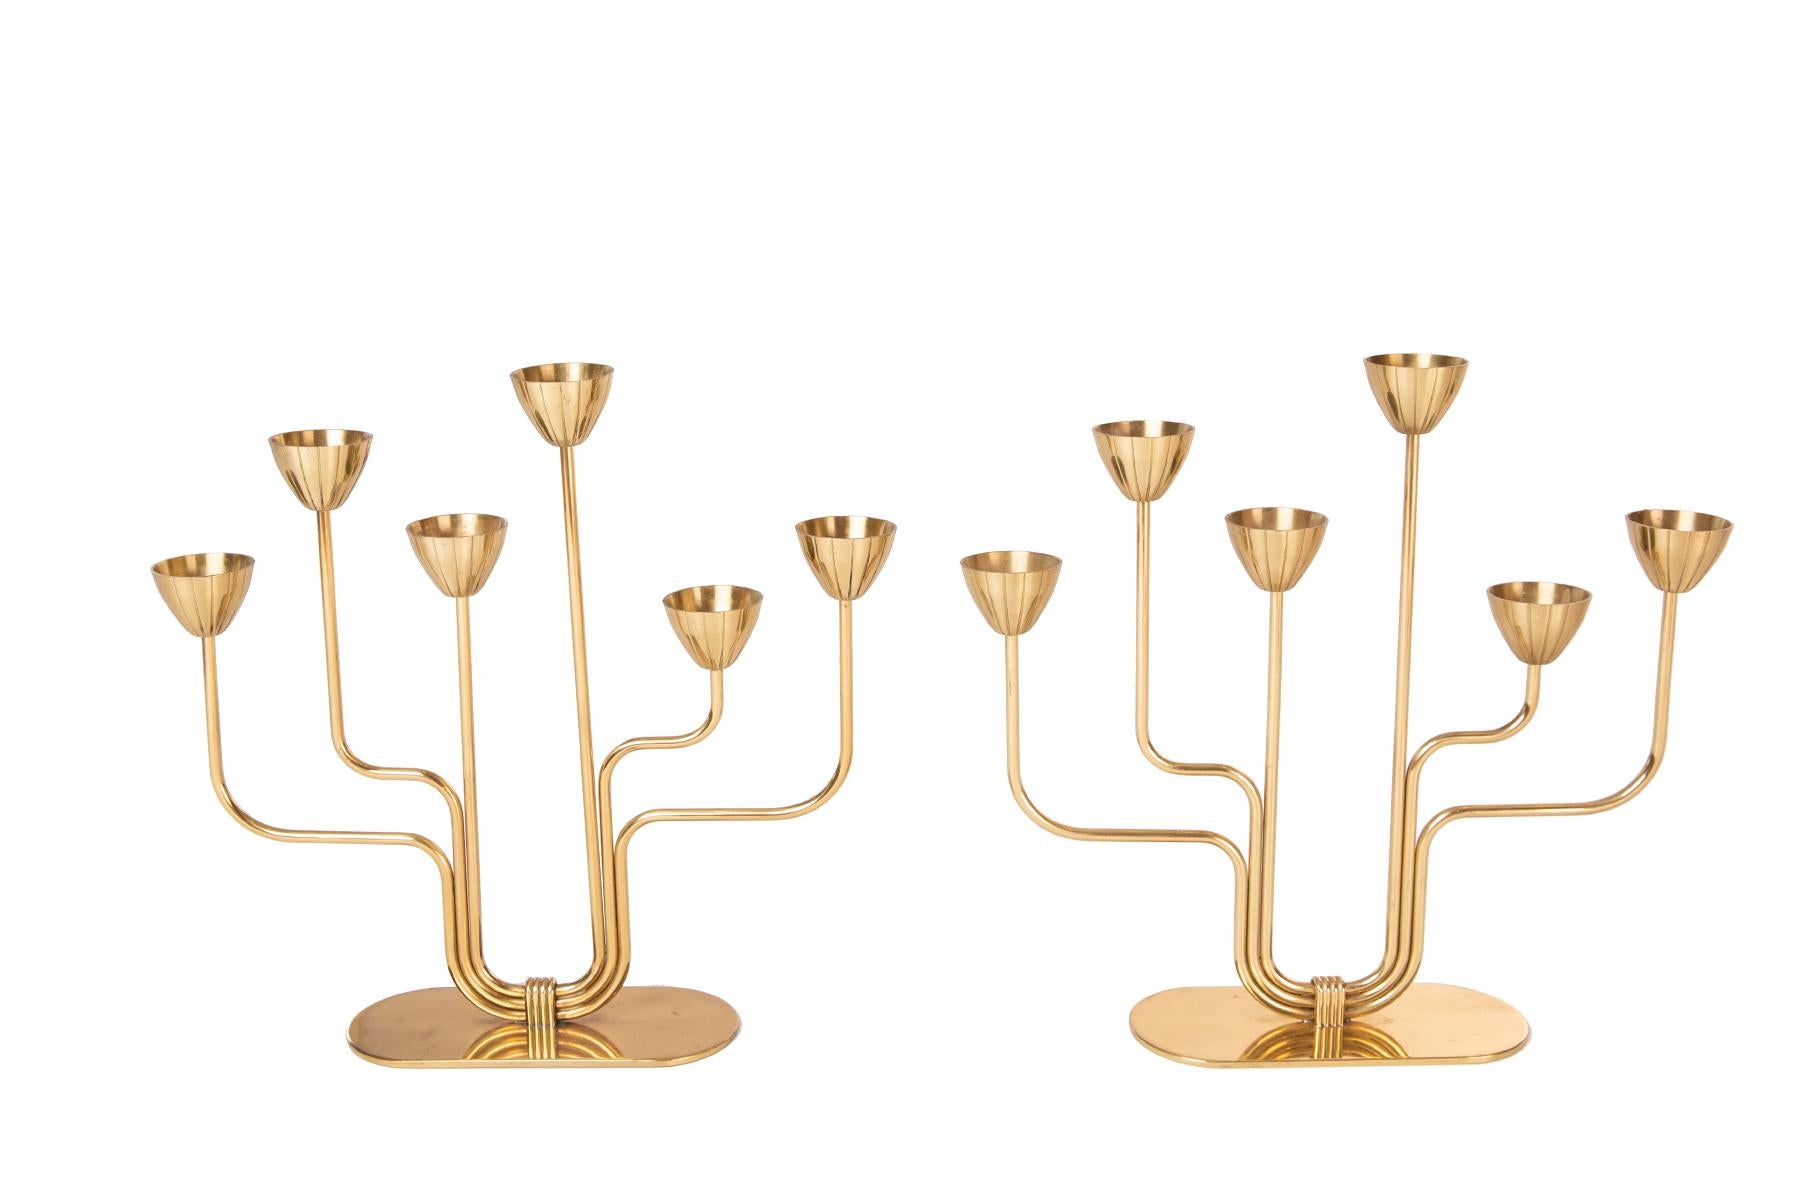 Pair of solid brass candelabras by Gunnar Ander for Ystad Metall.